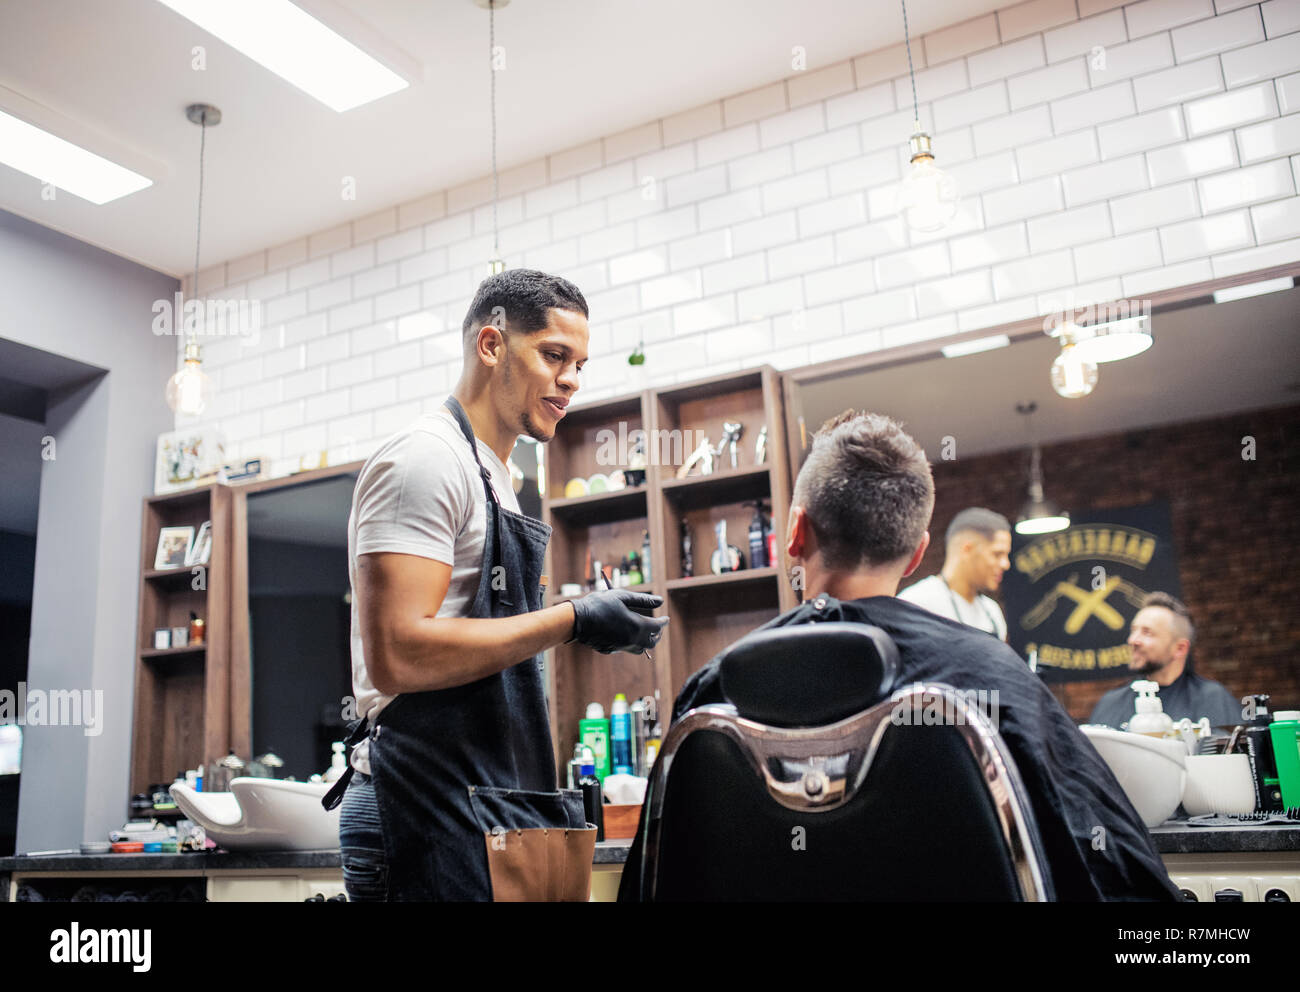 A man client talking to haidresser and hairstylist in barber shop. Stock Photo